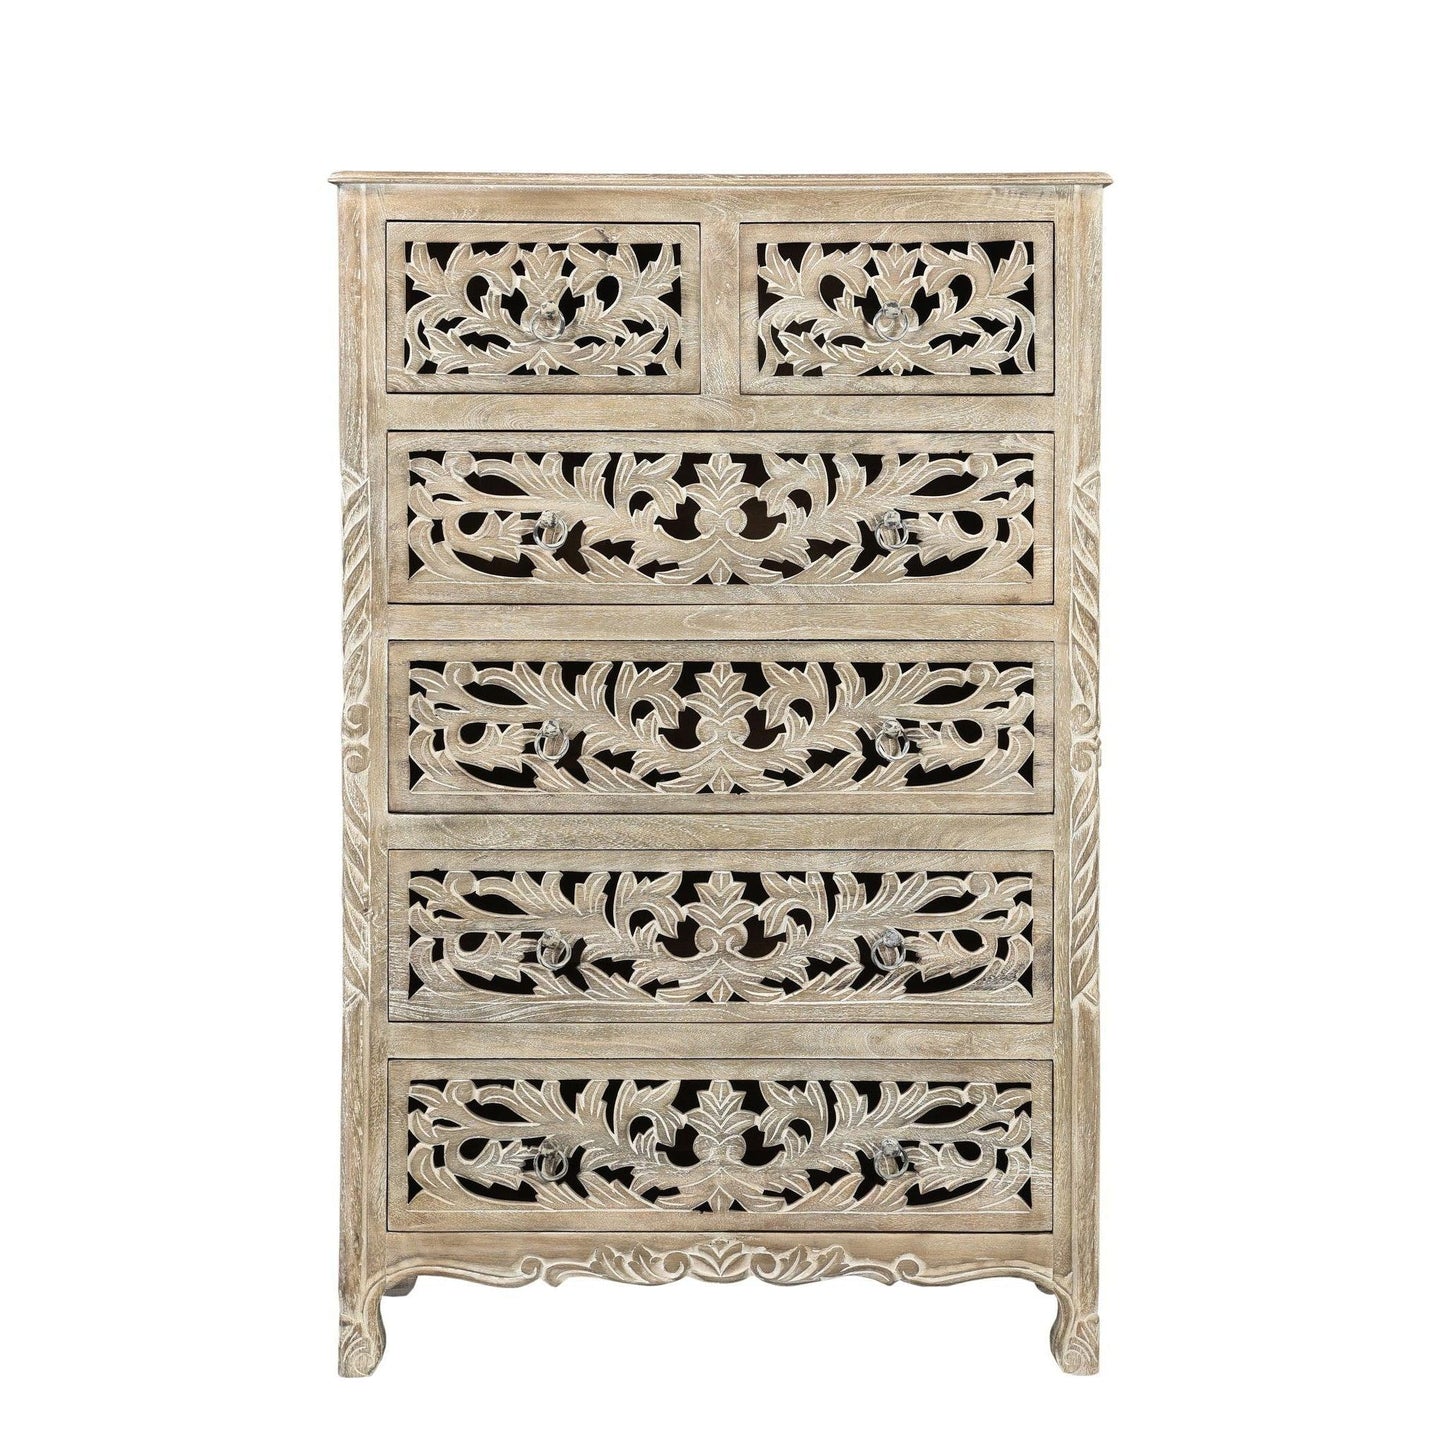 Lawrence 54 inches Tall Gray Floral Carved Chest - Sideboards and Things Brand_LOOMLAN Home, Color_Beige, Color_Gray, Features_Handmade, Features_Handmade/Handcarved, Features_Repurposed Materials, Finish_Distressed, Height_50-60, Hinges, Materials_Reclaimed Wood, Materials_Wood, Product Type_Chest of Drawers, Shelf Material_Wood, Width_30-40